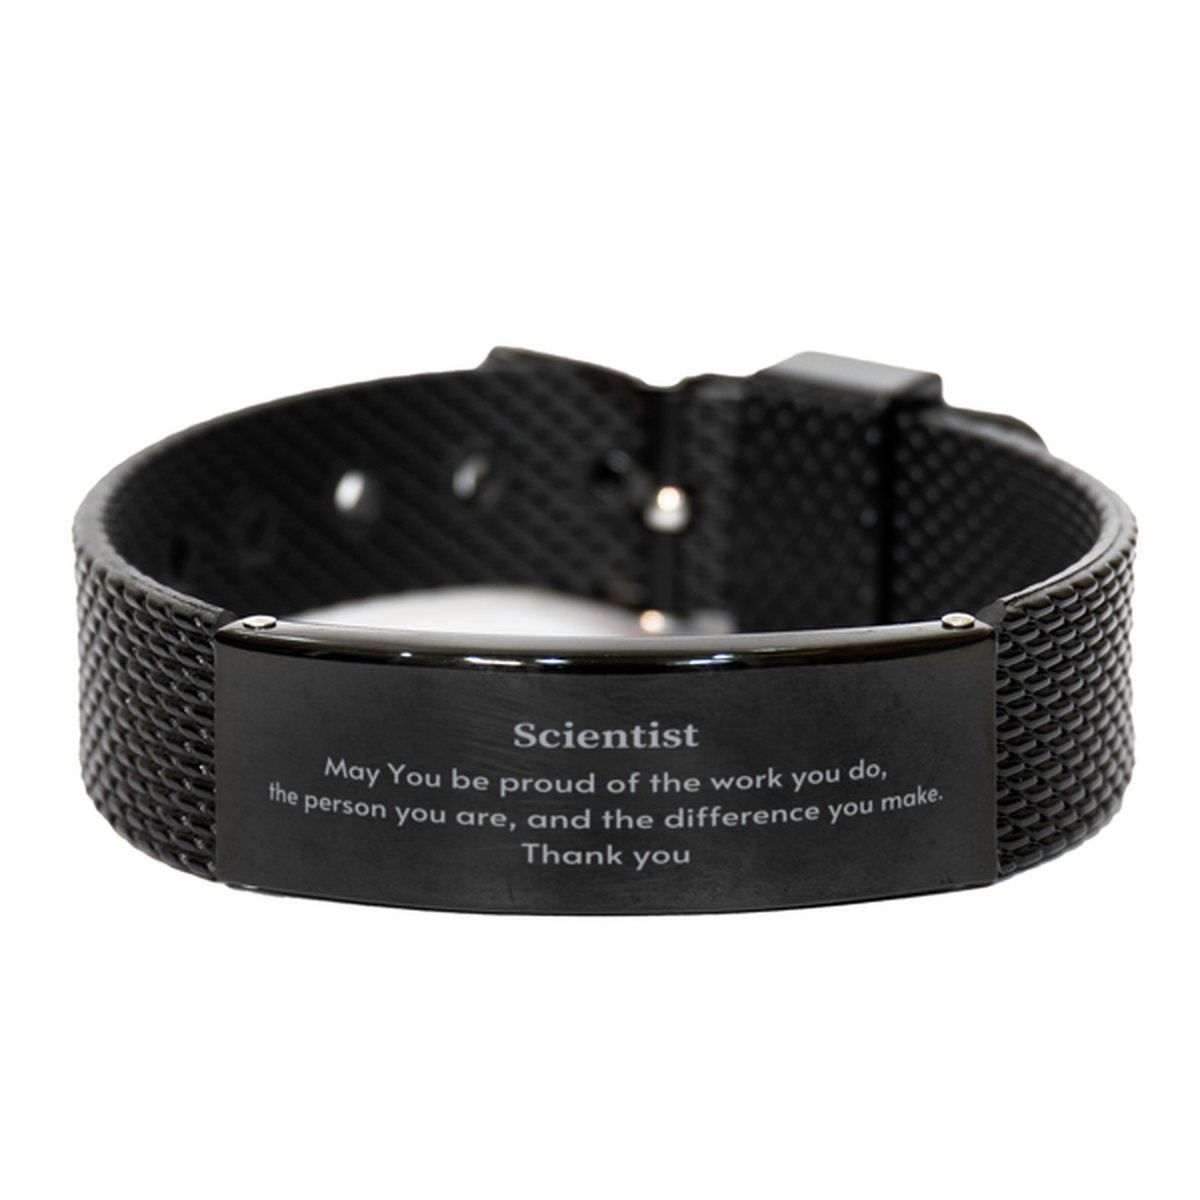 Heartwarming Black Shark Mesh Bracelet Retirement Coworkers Gifts for Scientist, Scientist May You be proud of the work you do, the person you are Gifts for Boss Men Women Friends